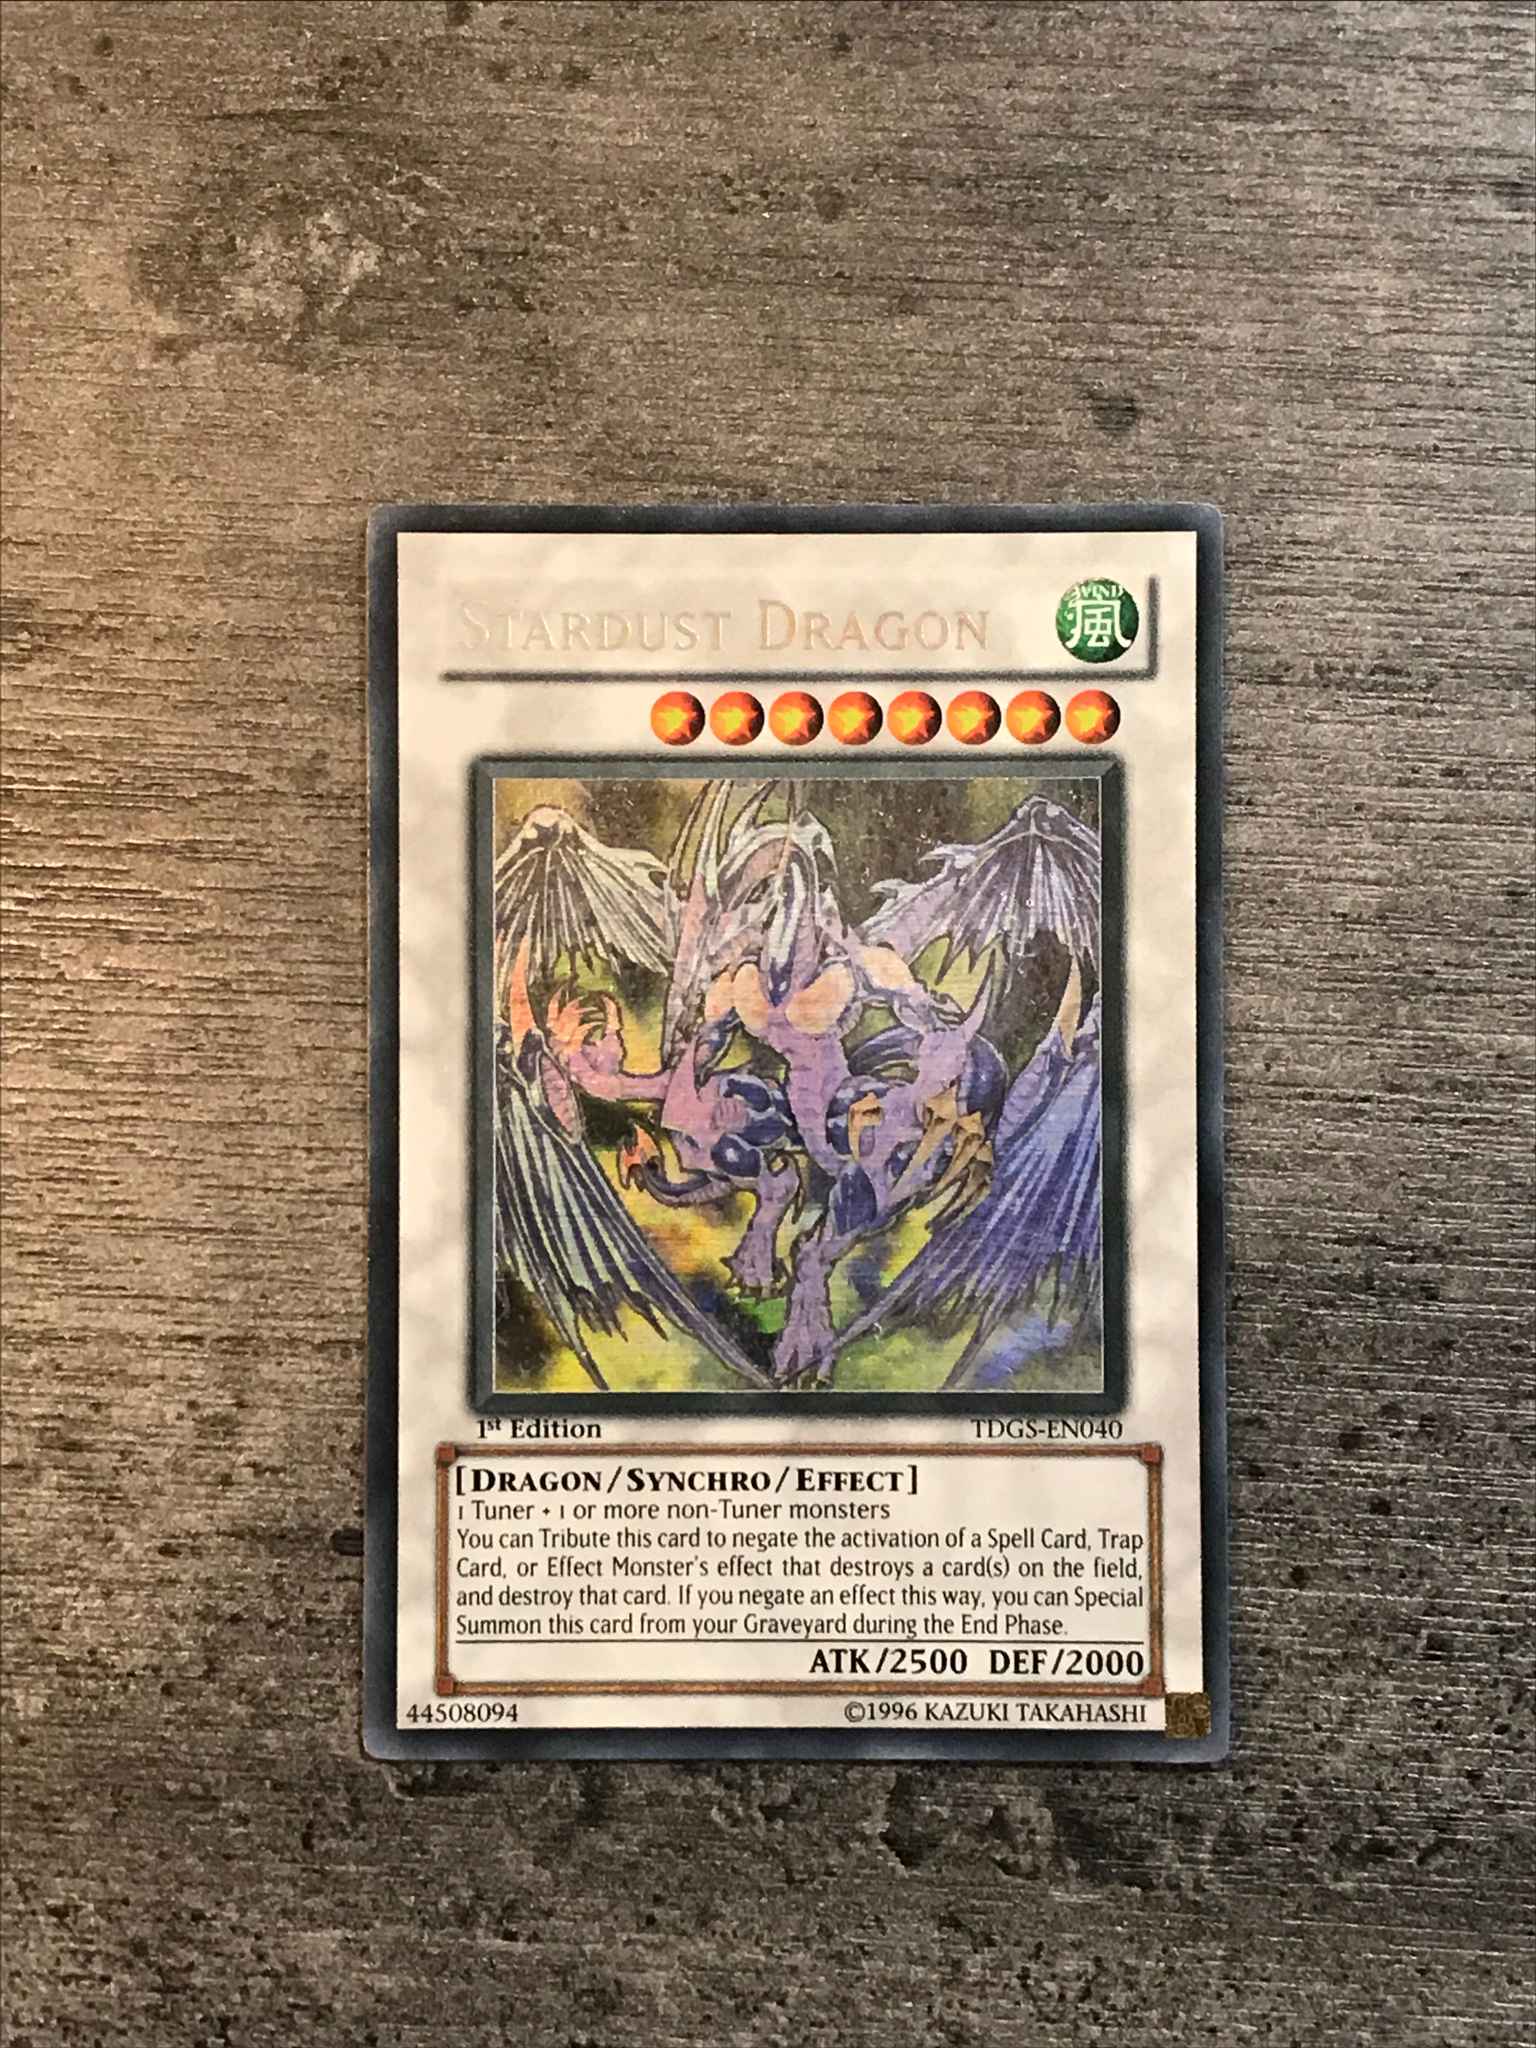 Unlimited Edition Moderately YuGiOh Stardust Dragon Ghost Rare TDGS-EN040